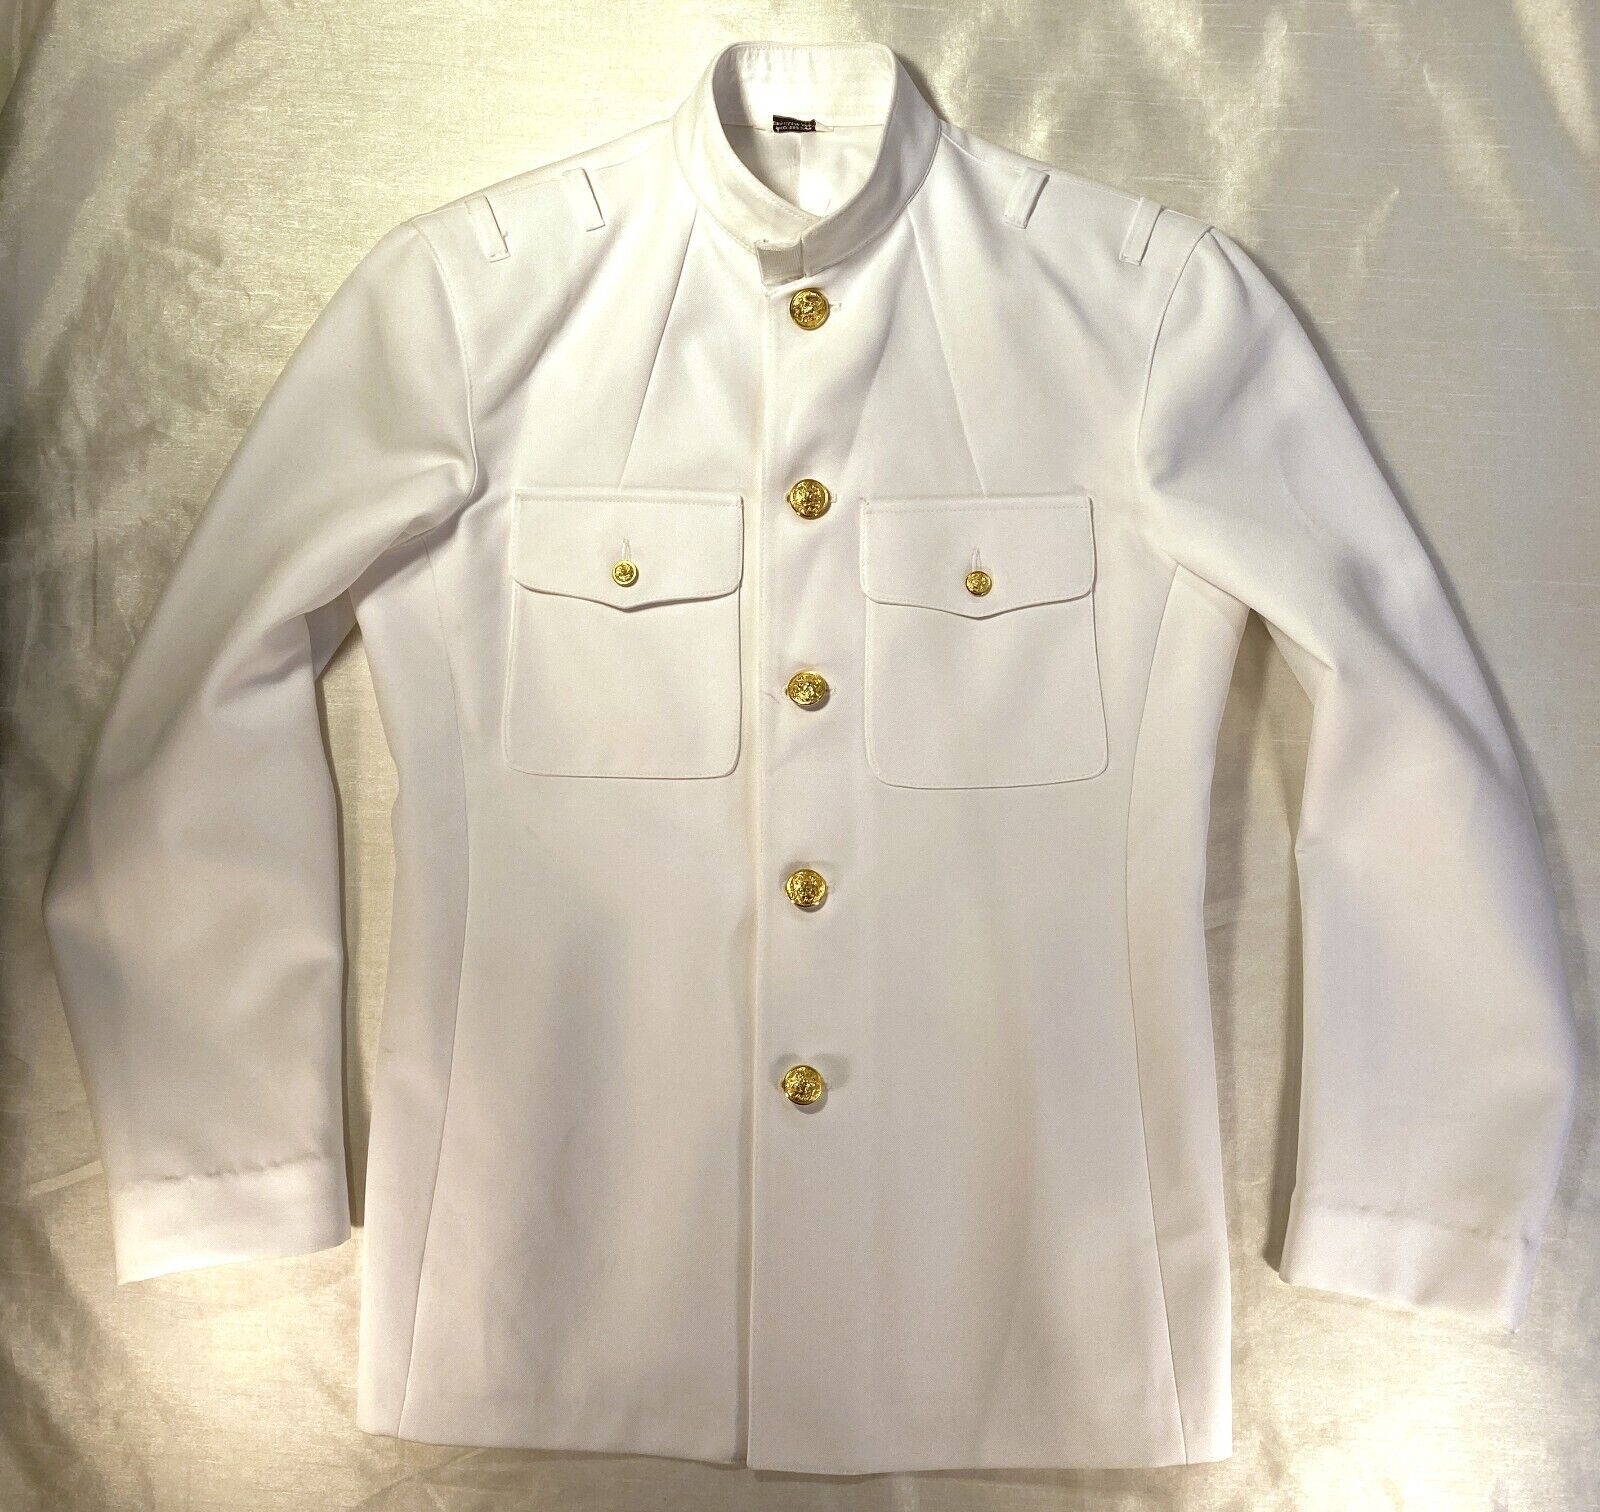 AUTHENTIC US NAVY MALE NAVAL OFFICER SERVICE DRESS WHITE COAT 42 REG